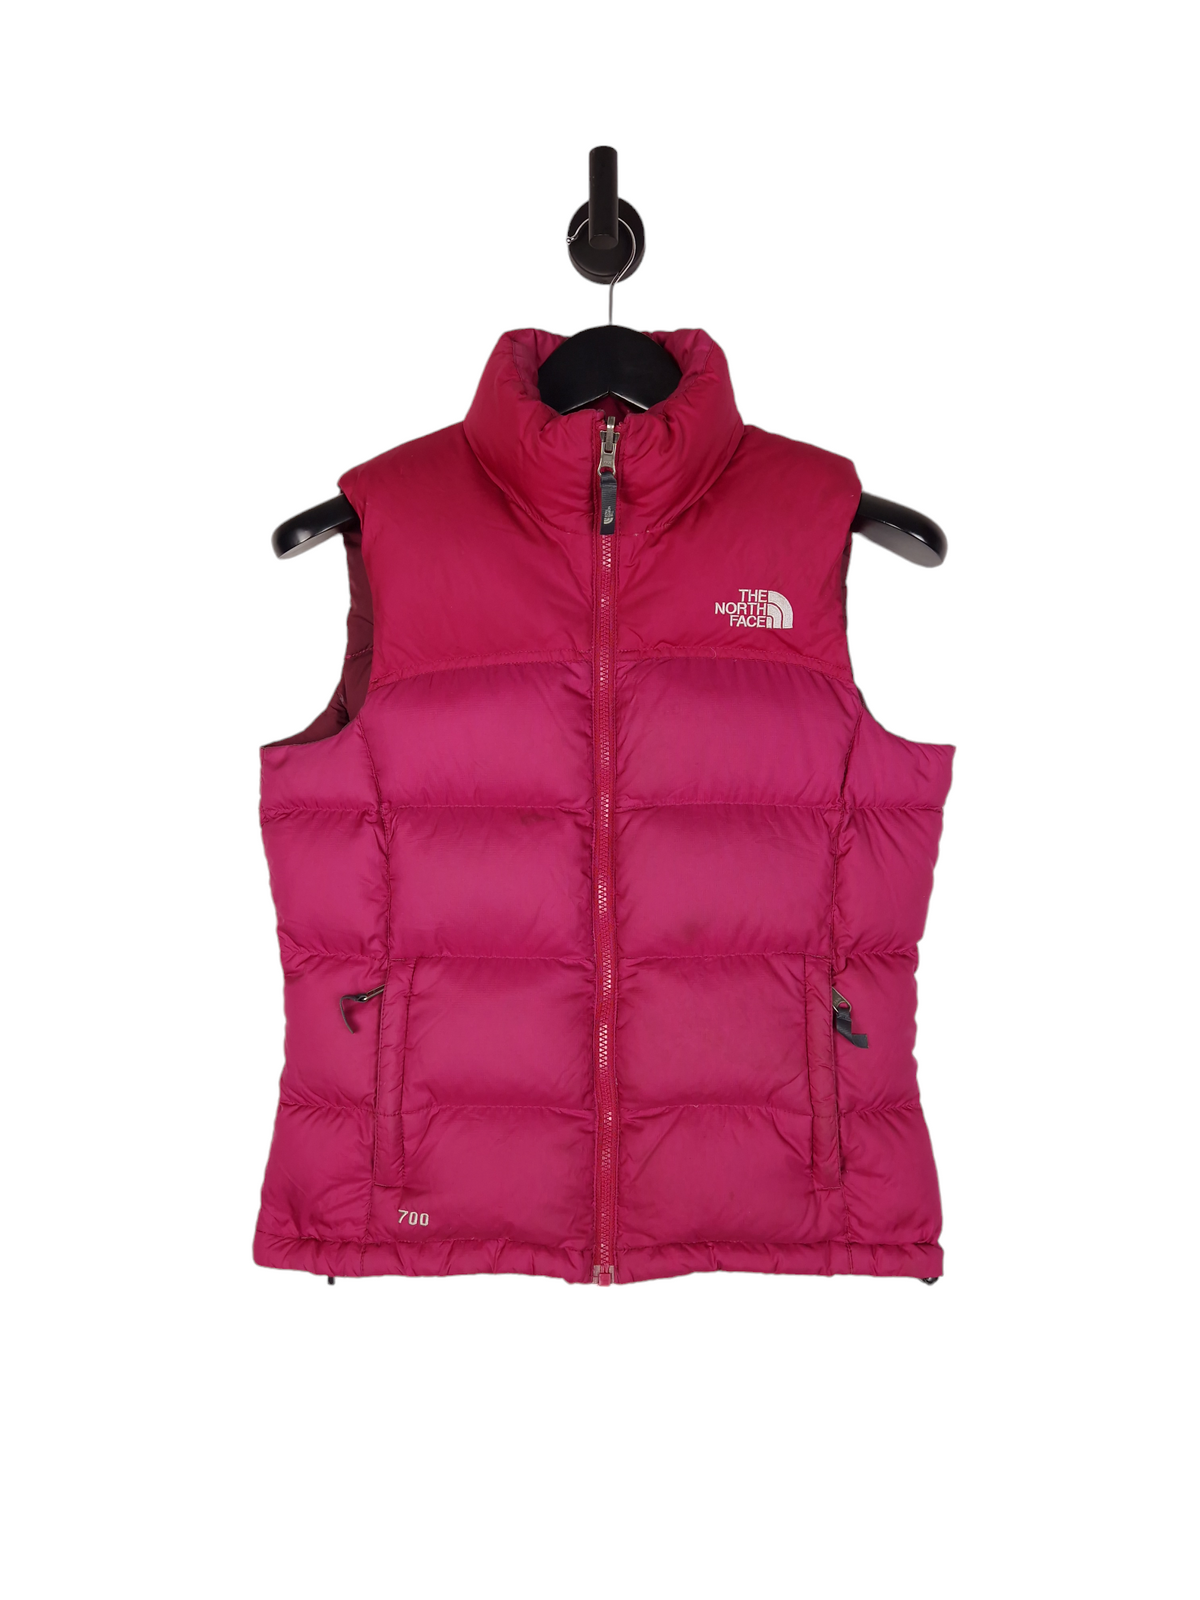 The North Face 700 Gilet Puffer Jacket - Size  UK 8/P